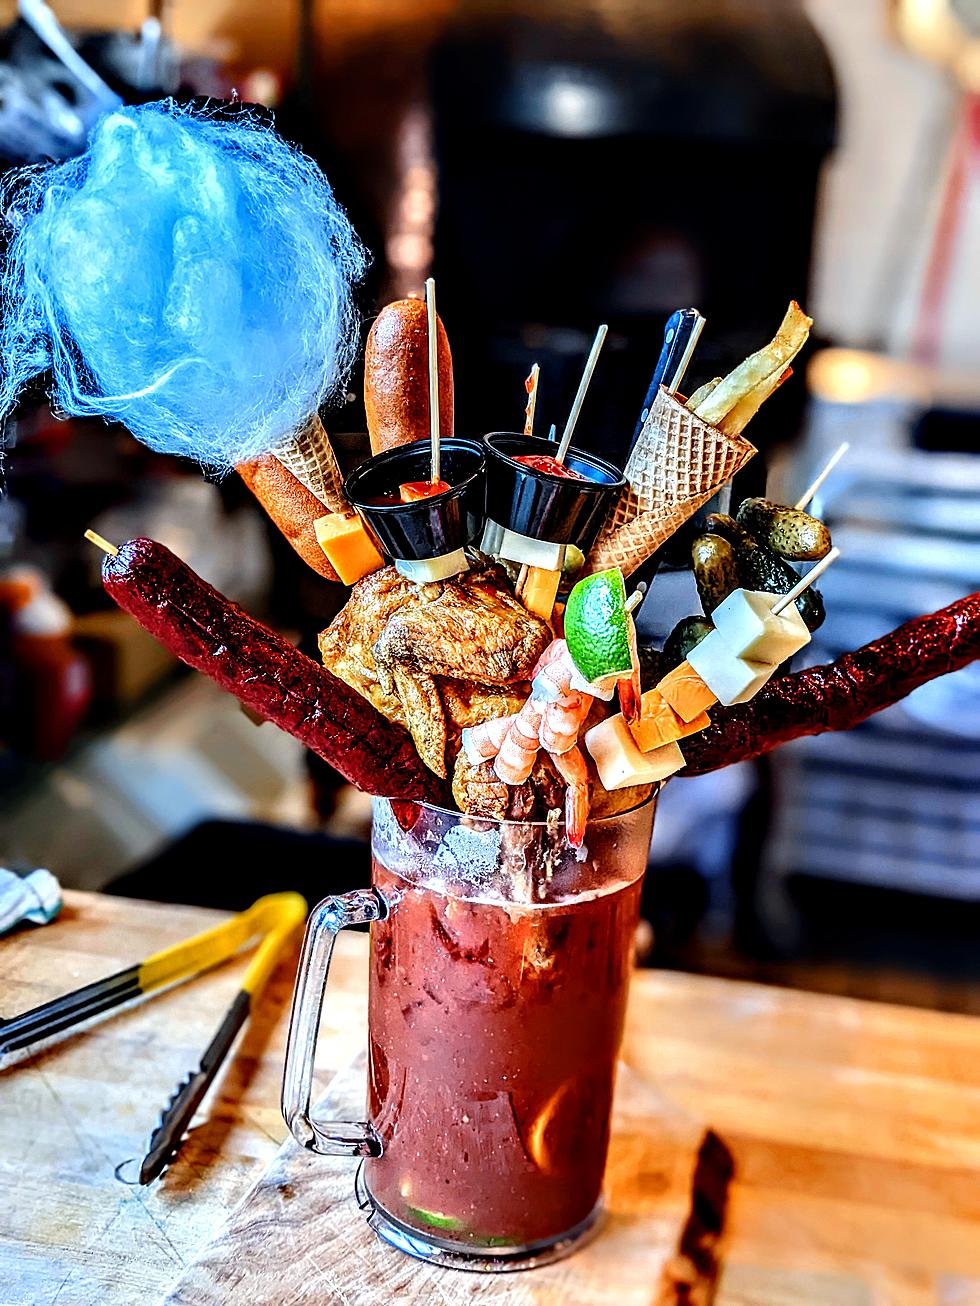 A Louisville Restaurant Serves Up a Fun Bloody Mary Called &#8220;The Beast&#8221;